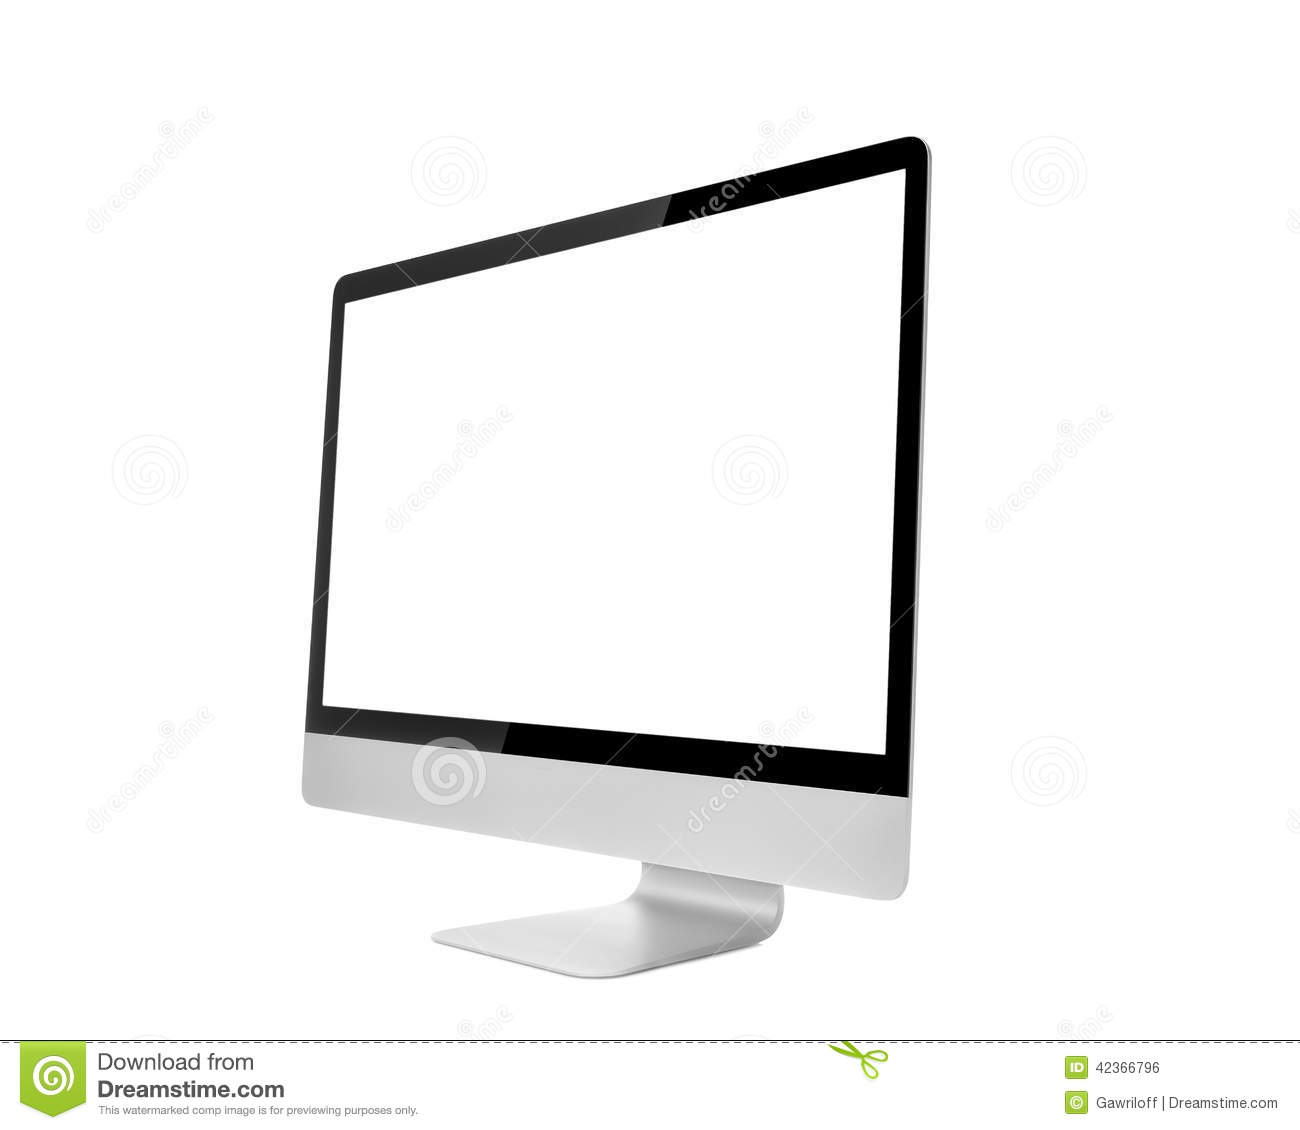 Teamviewer On Mac Showing White Screen